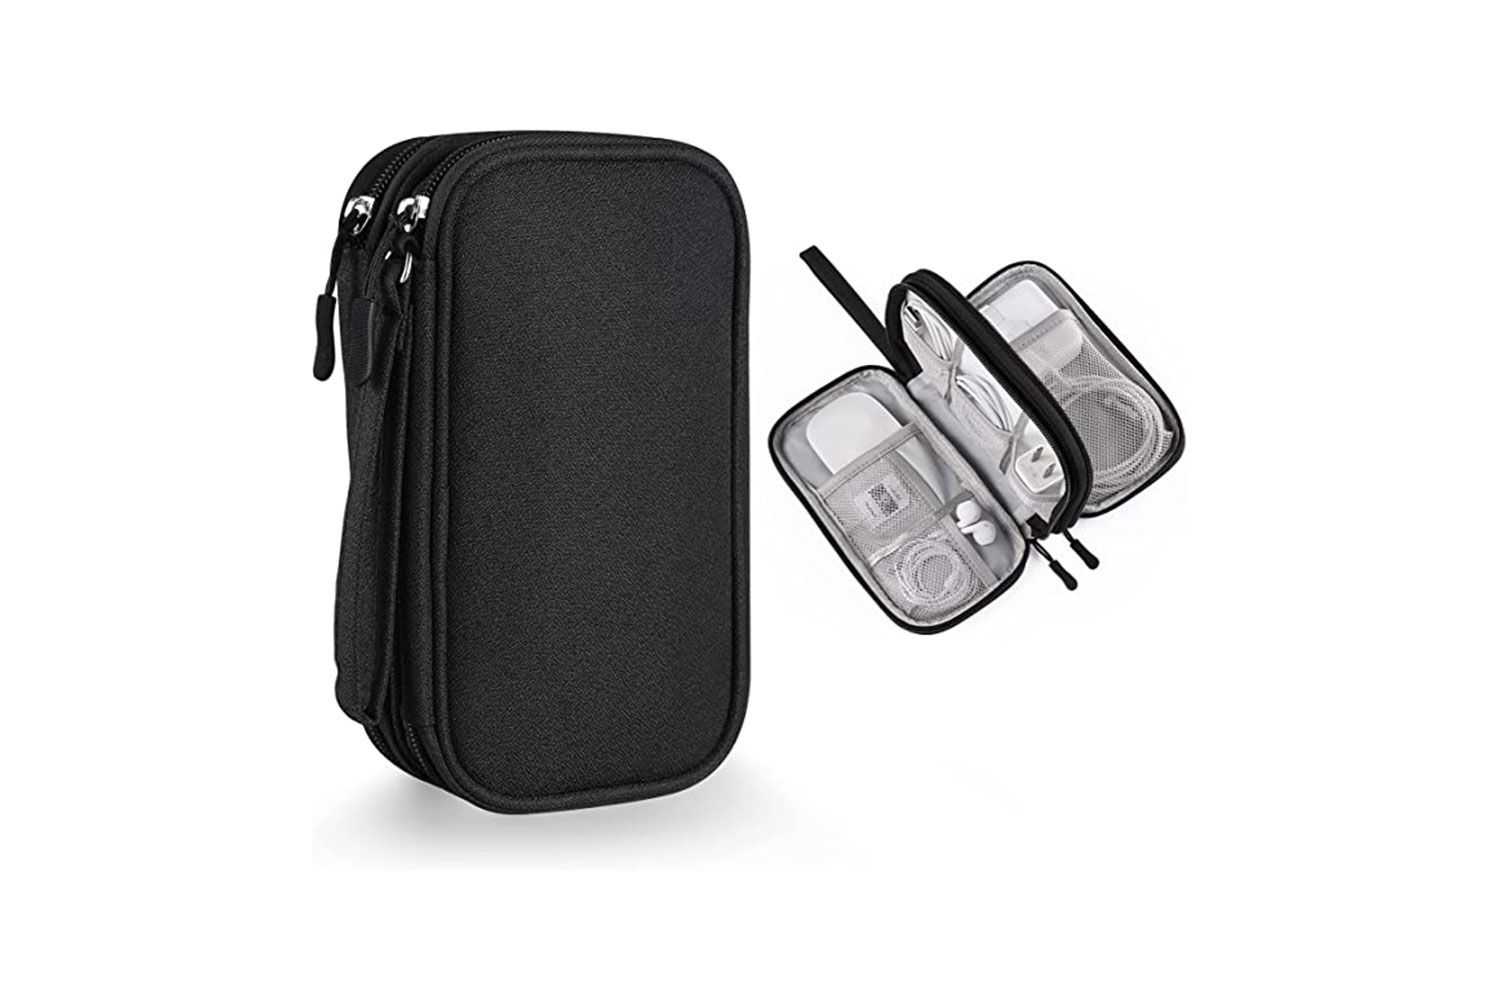 Amazon Bevegekos Small Carrying Tech Kit for Electronics and Accessories